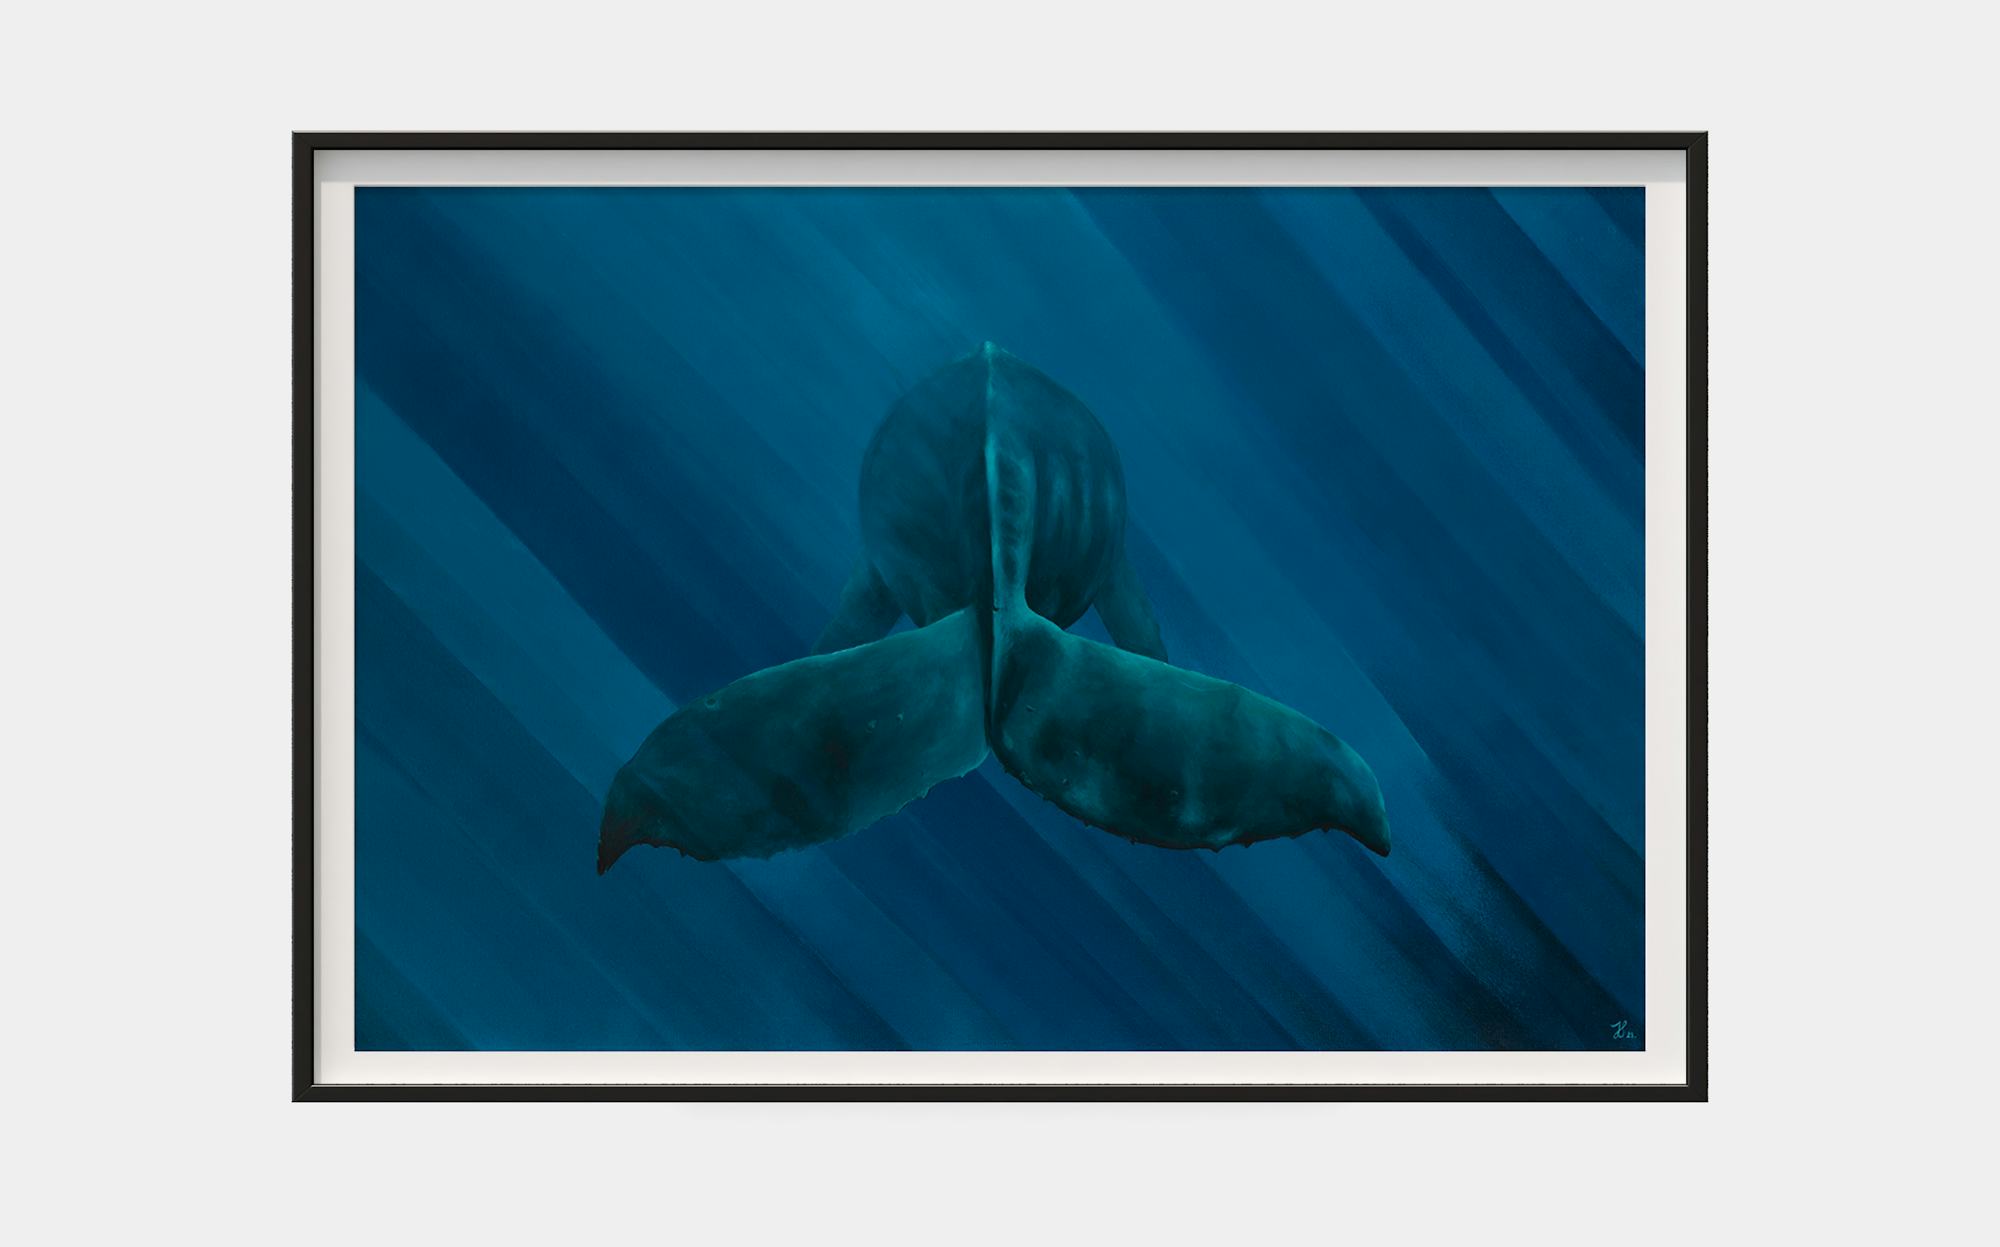 Framed high quality print of a humpback whale tale floating in the ocean.